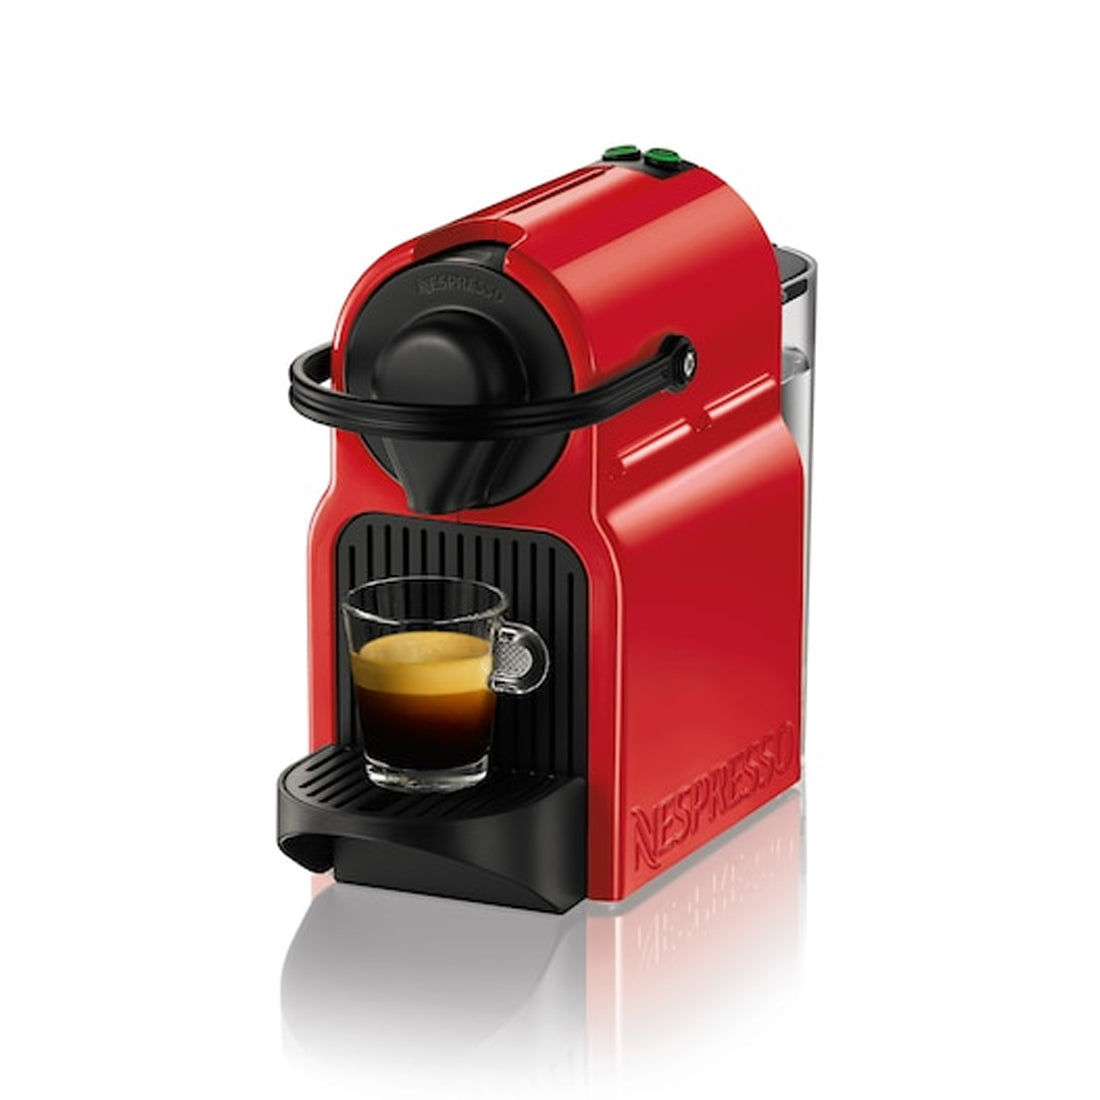 Nespresso - Inissia - Ruby Red - Coffee Machine - by Del Longhi (with 14 Pods Tester Kit inc) - 1 Year Warranty